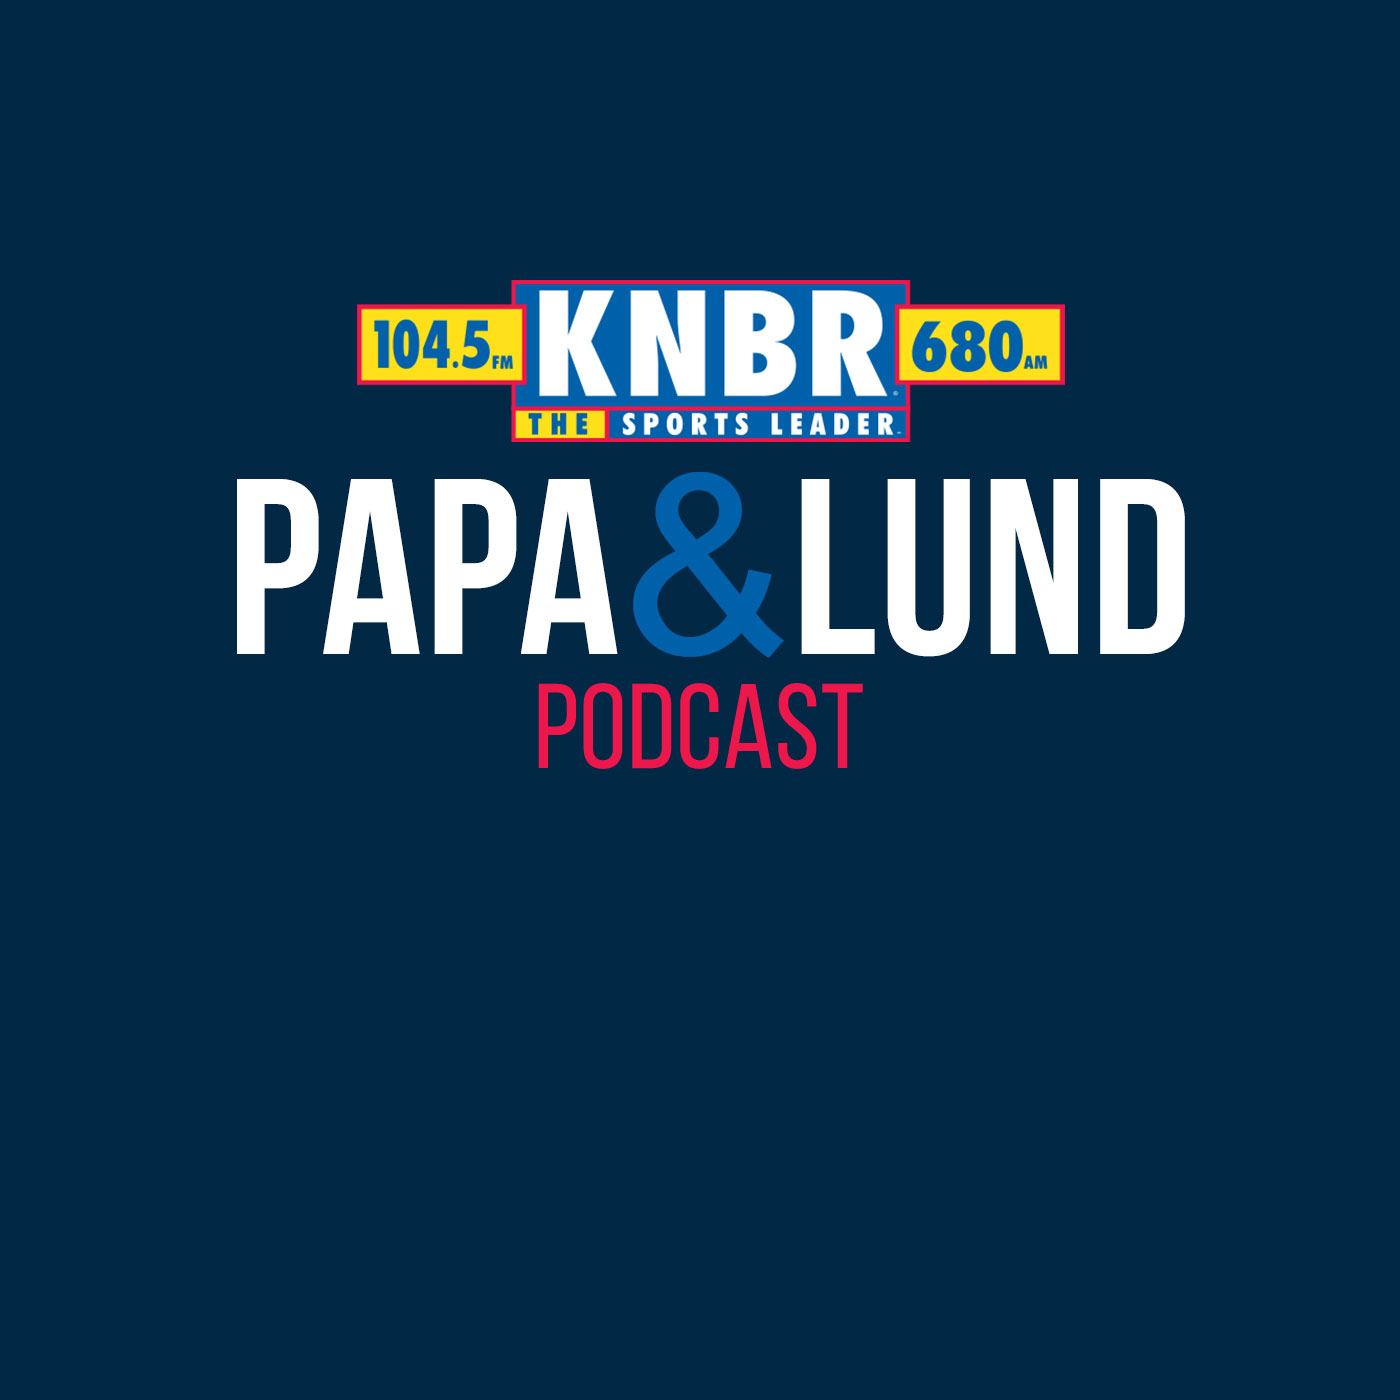 4-16 Bobby Marks joins Papa & Lund to discuss how the Warriors can attack this offense with CP3 & Klay Thompson